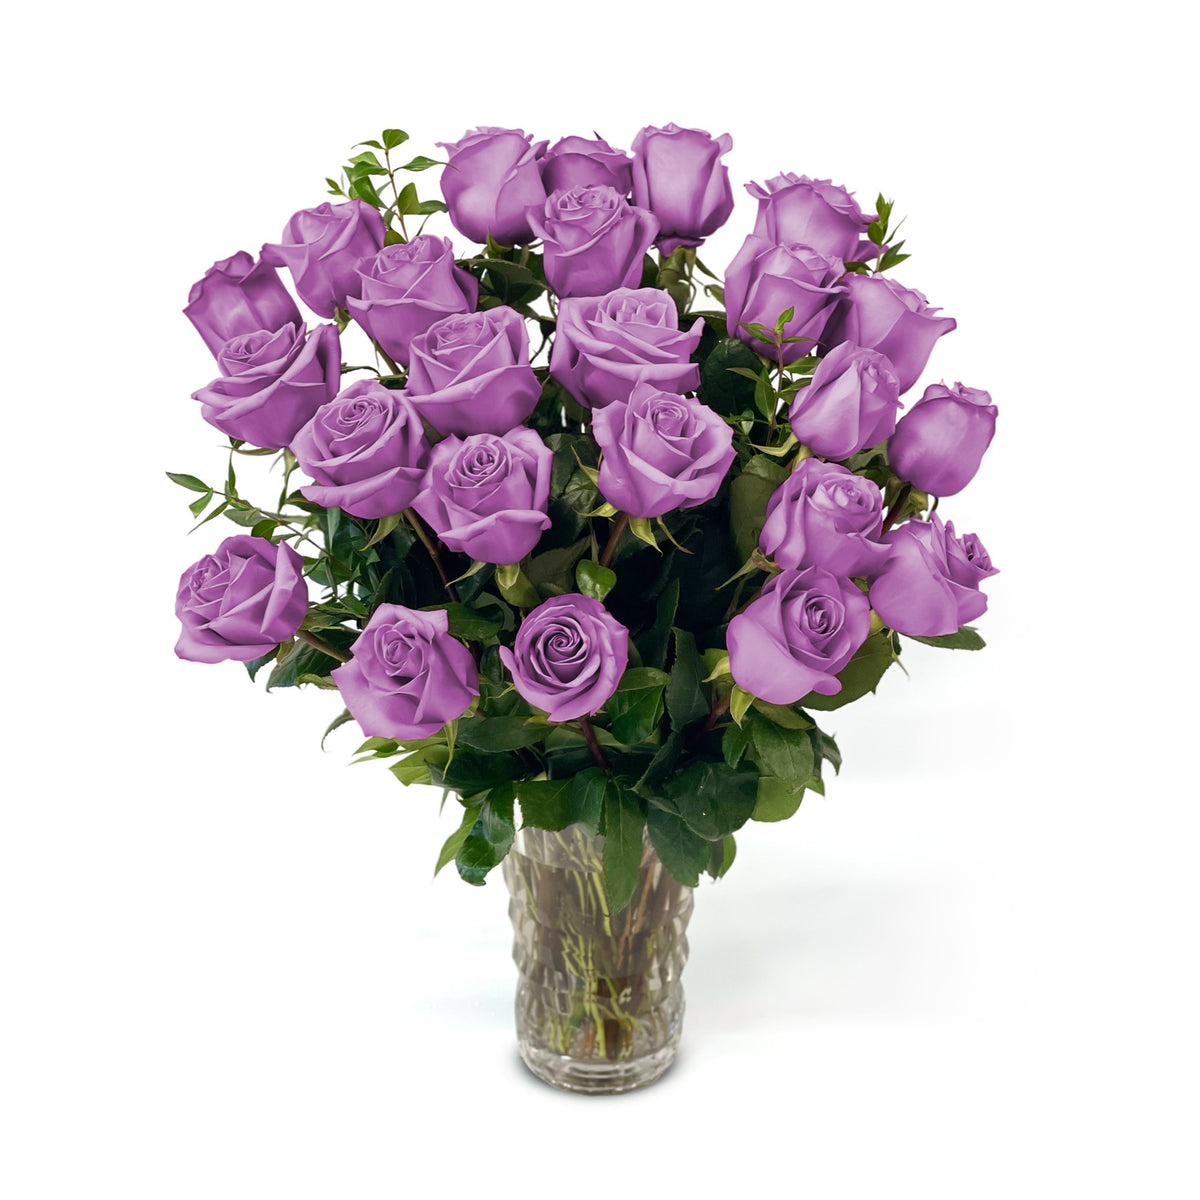 NYC Flower Delivery - Fresh Roses in a Crystal Vase | Purple - 2 Dozen - Roses